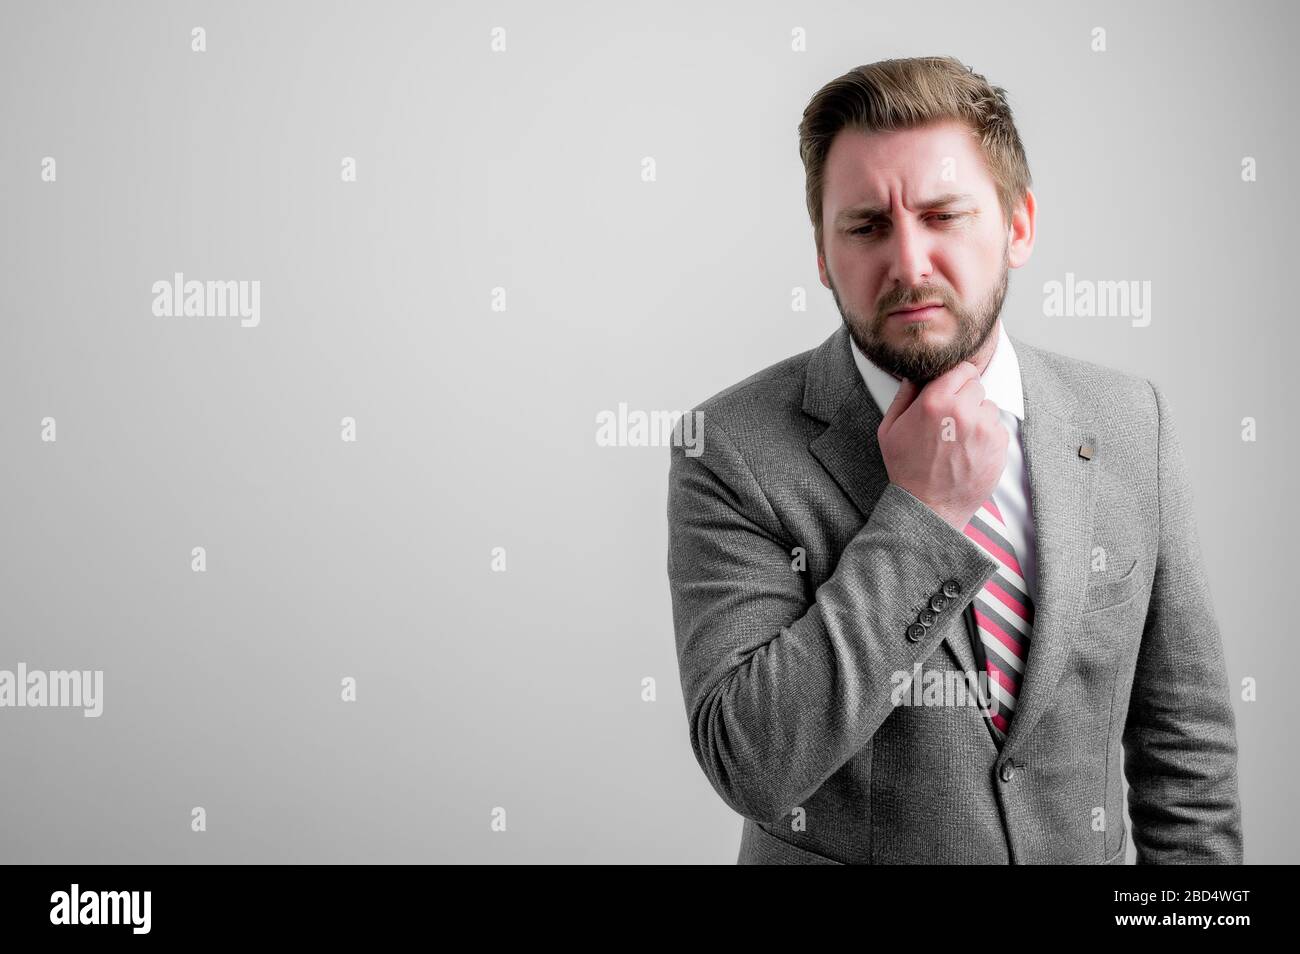 Portrait of business man wearing business clothes gesturing joint pain isolated on grey background with copy space advertising area Stock Photo